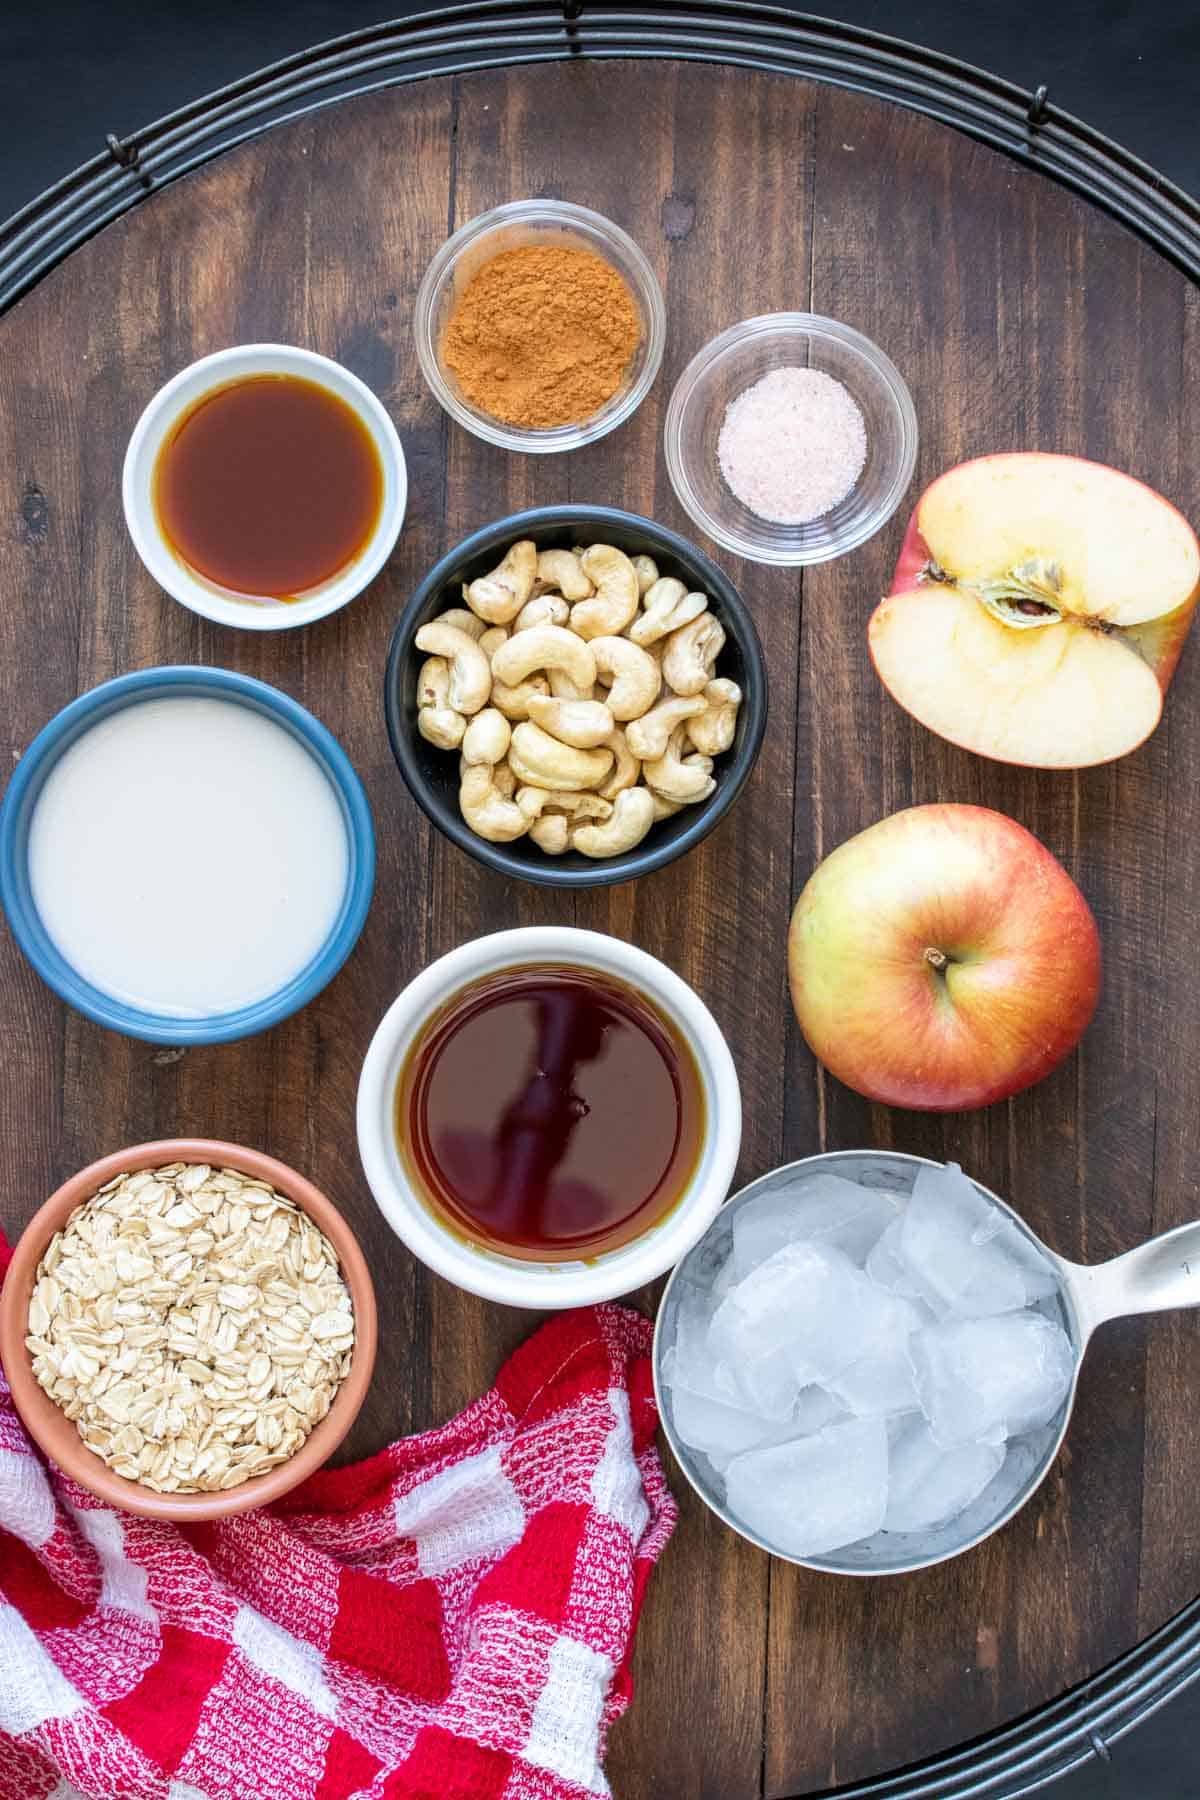 Ingredients to make a dairy free apple smoothie on a wooden surface with a red checked towel